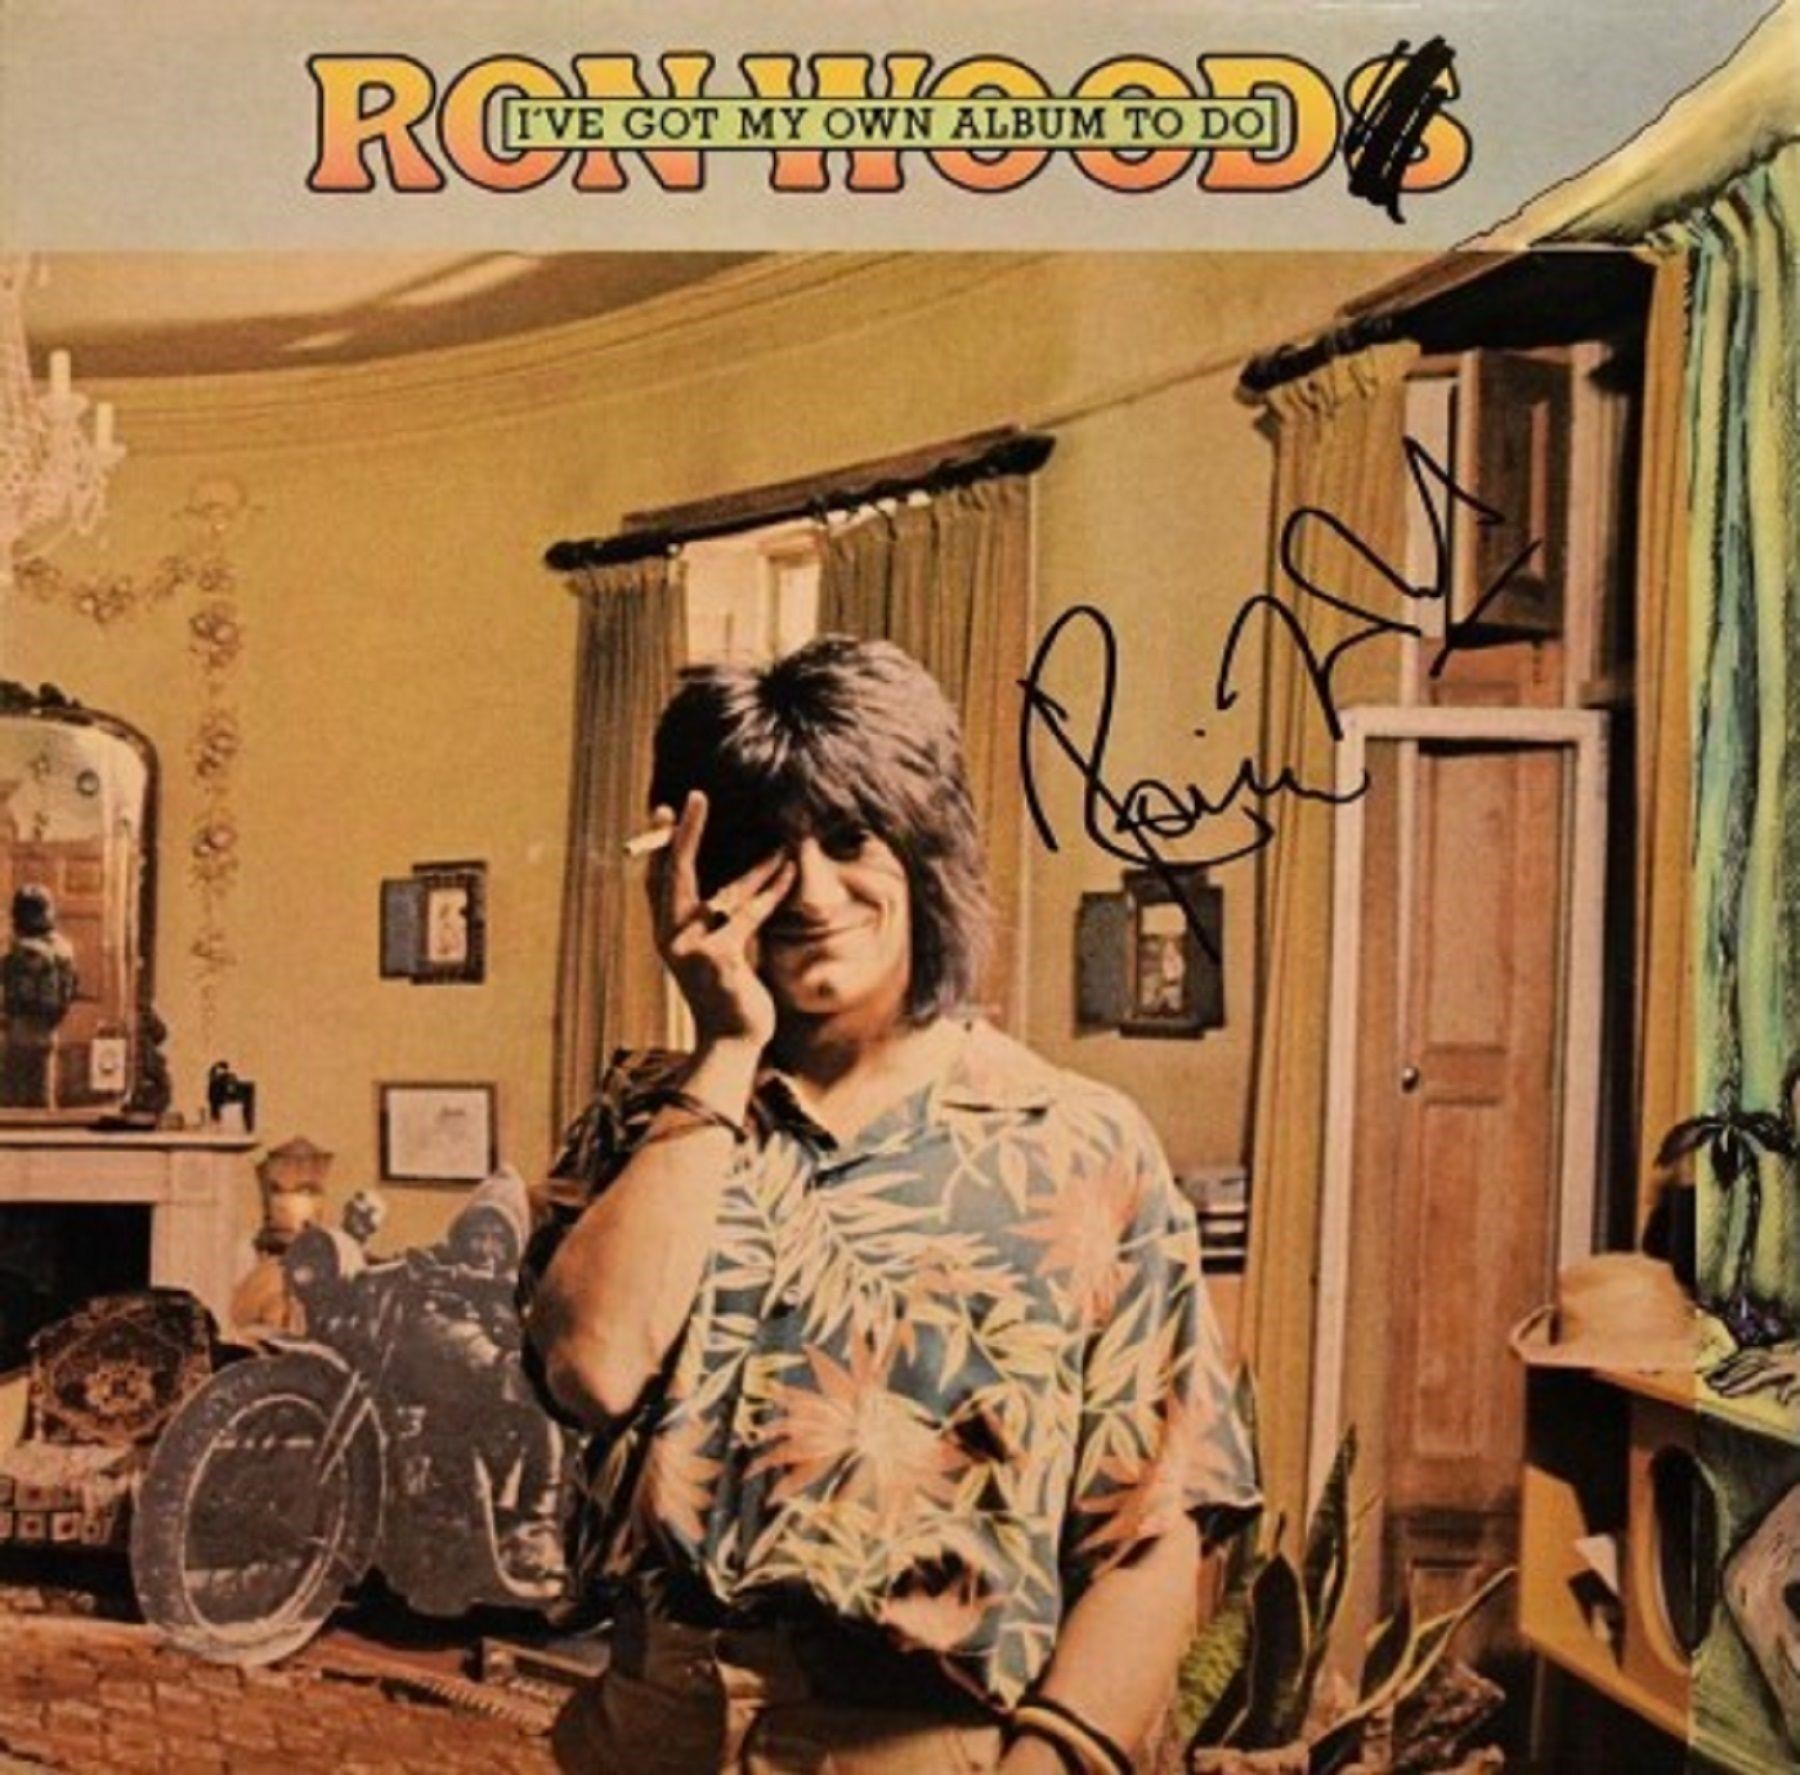 Ron Wood signed "I've Got My Own Record Album To D